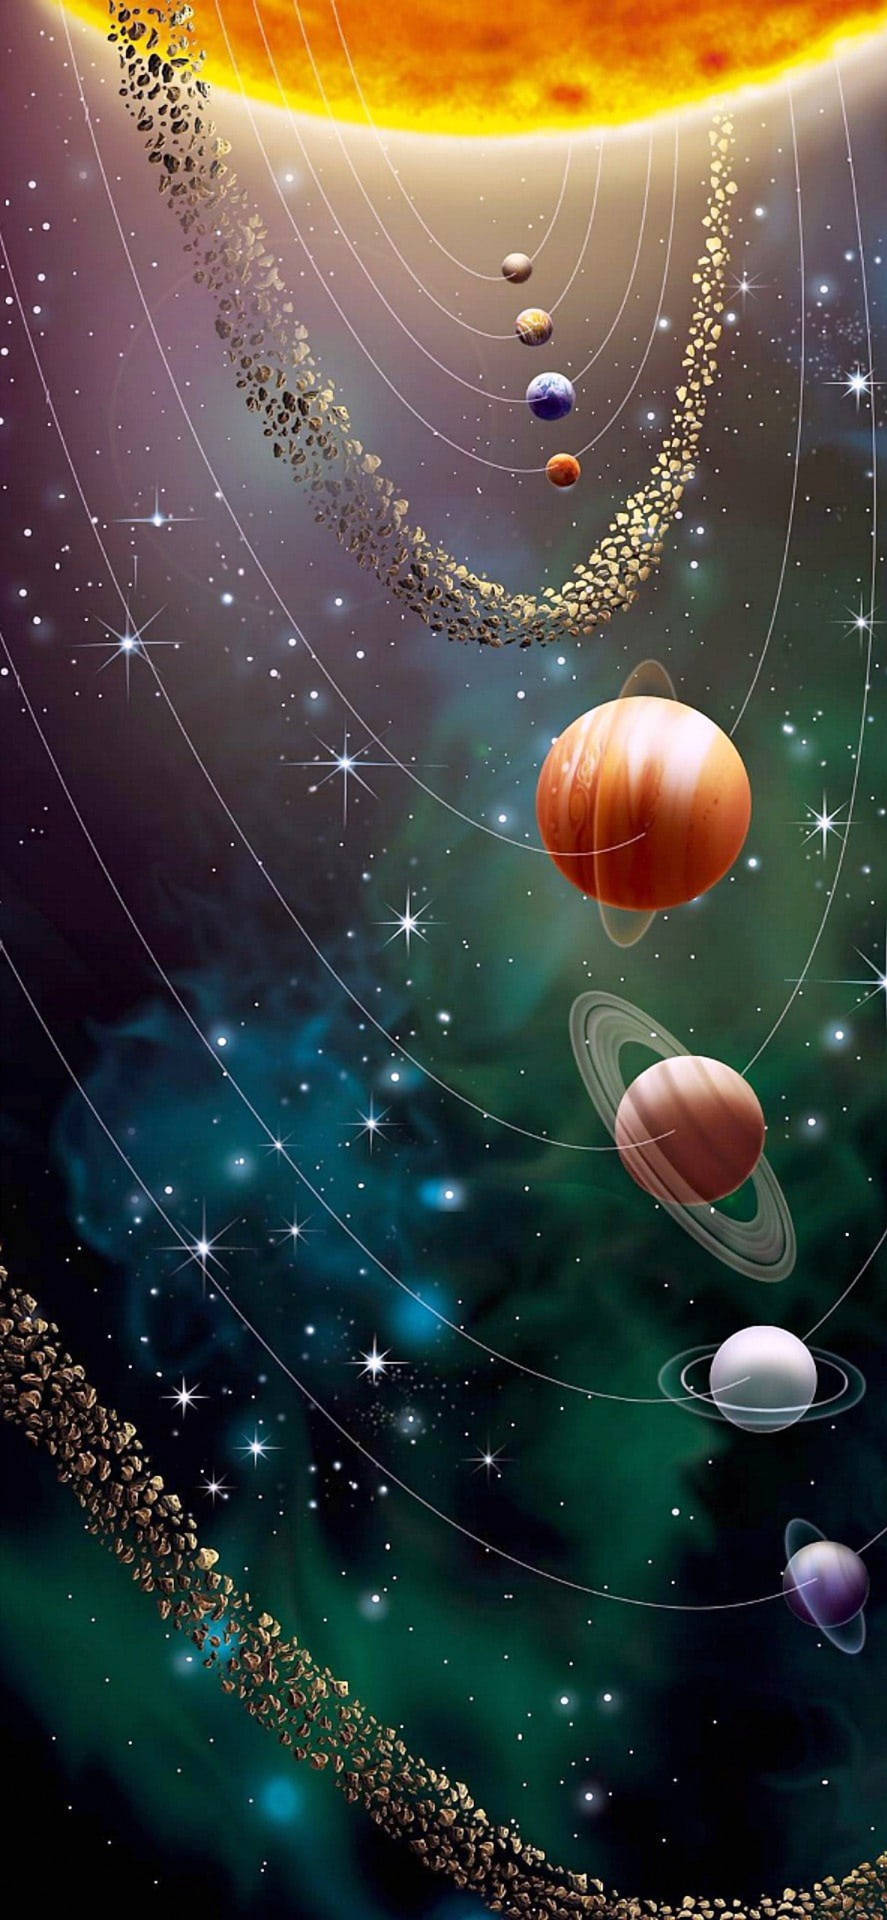 Solar System In The Cosmos Background